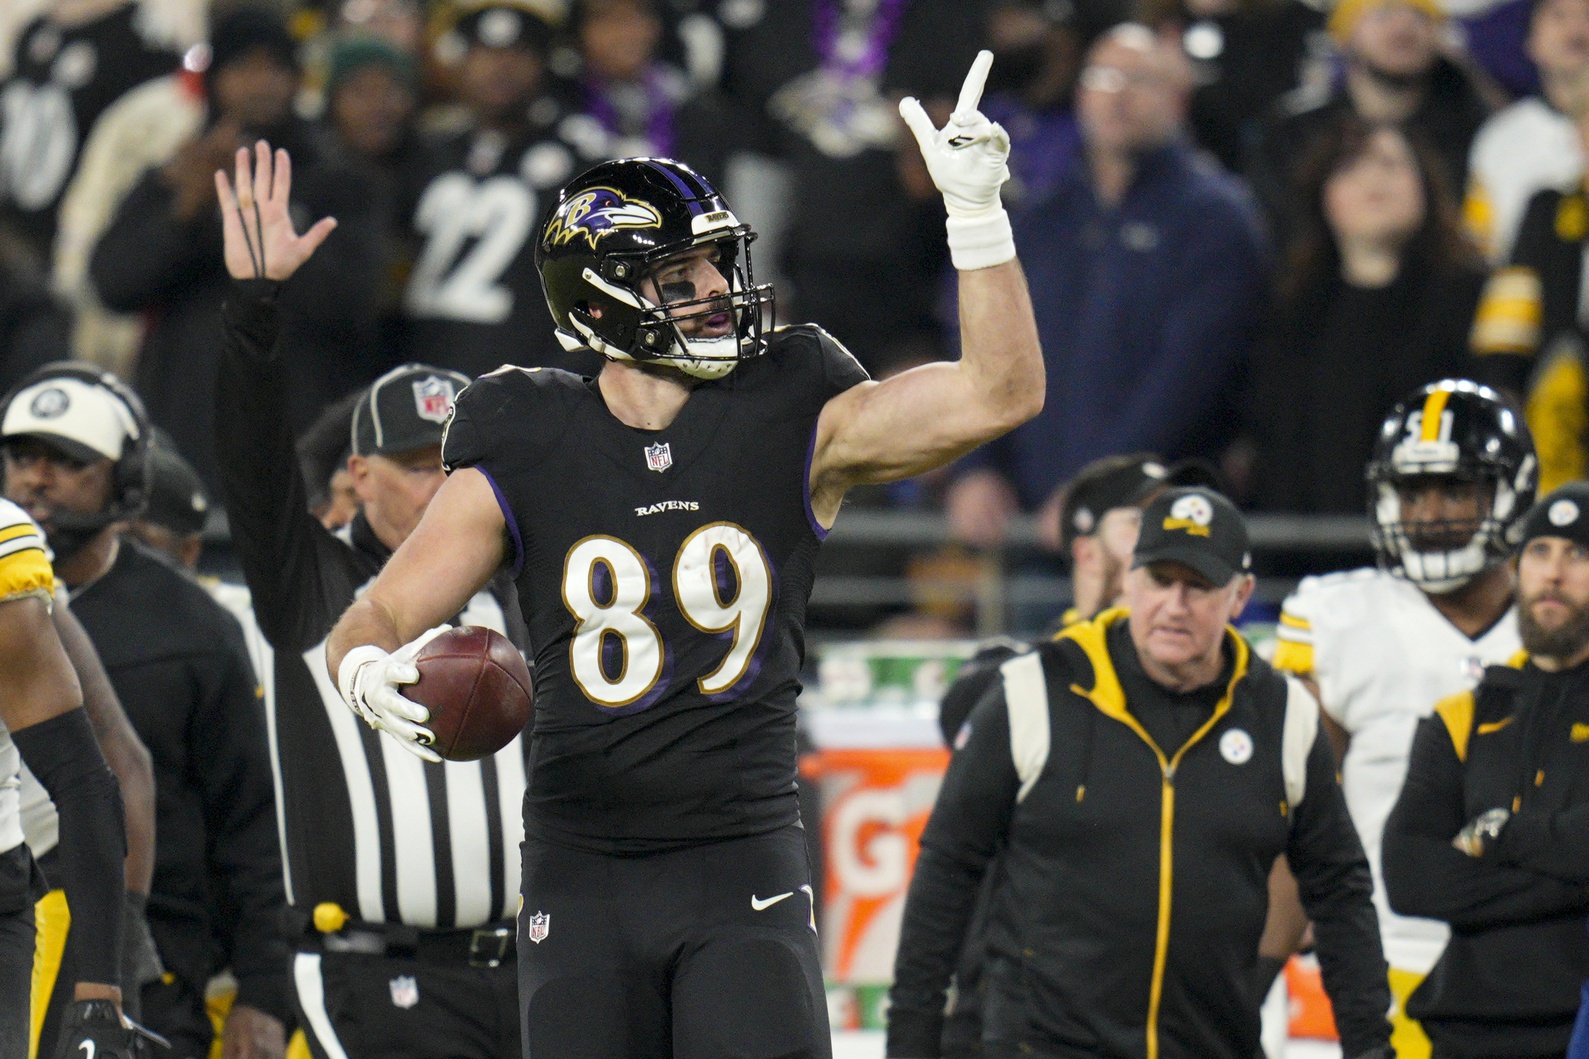 Jan 1, 2023; Baltimore, Maryland, USA; Baltimore Ravens tight end Mark Andrews (89) reacts after making a catch against the Pittsburgh Steelers during the first half at M&T Bank Stadium. Mandatory Credit: Jessica Rapfogel-USA TODAY Sports